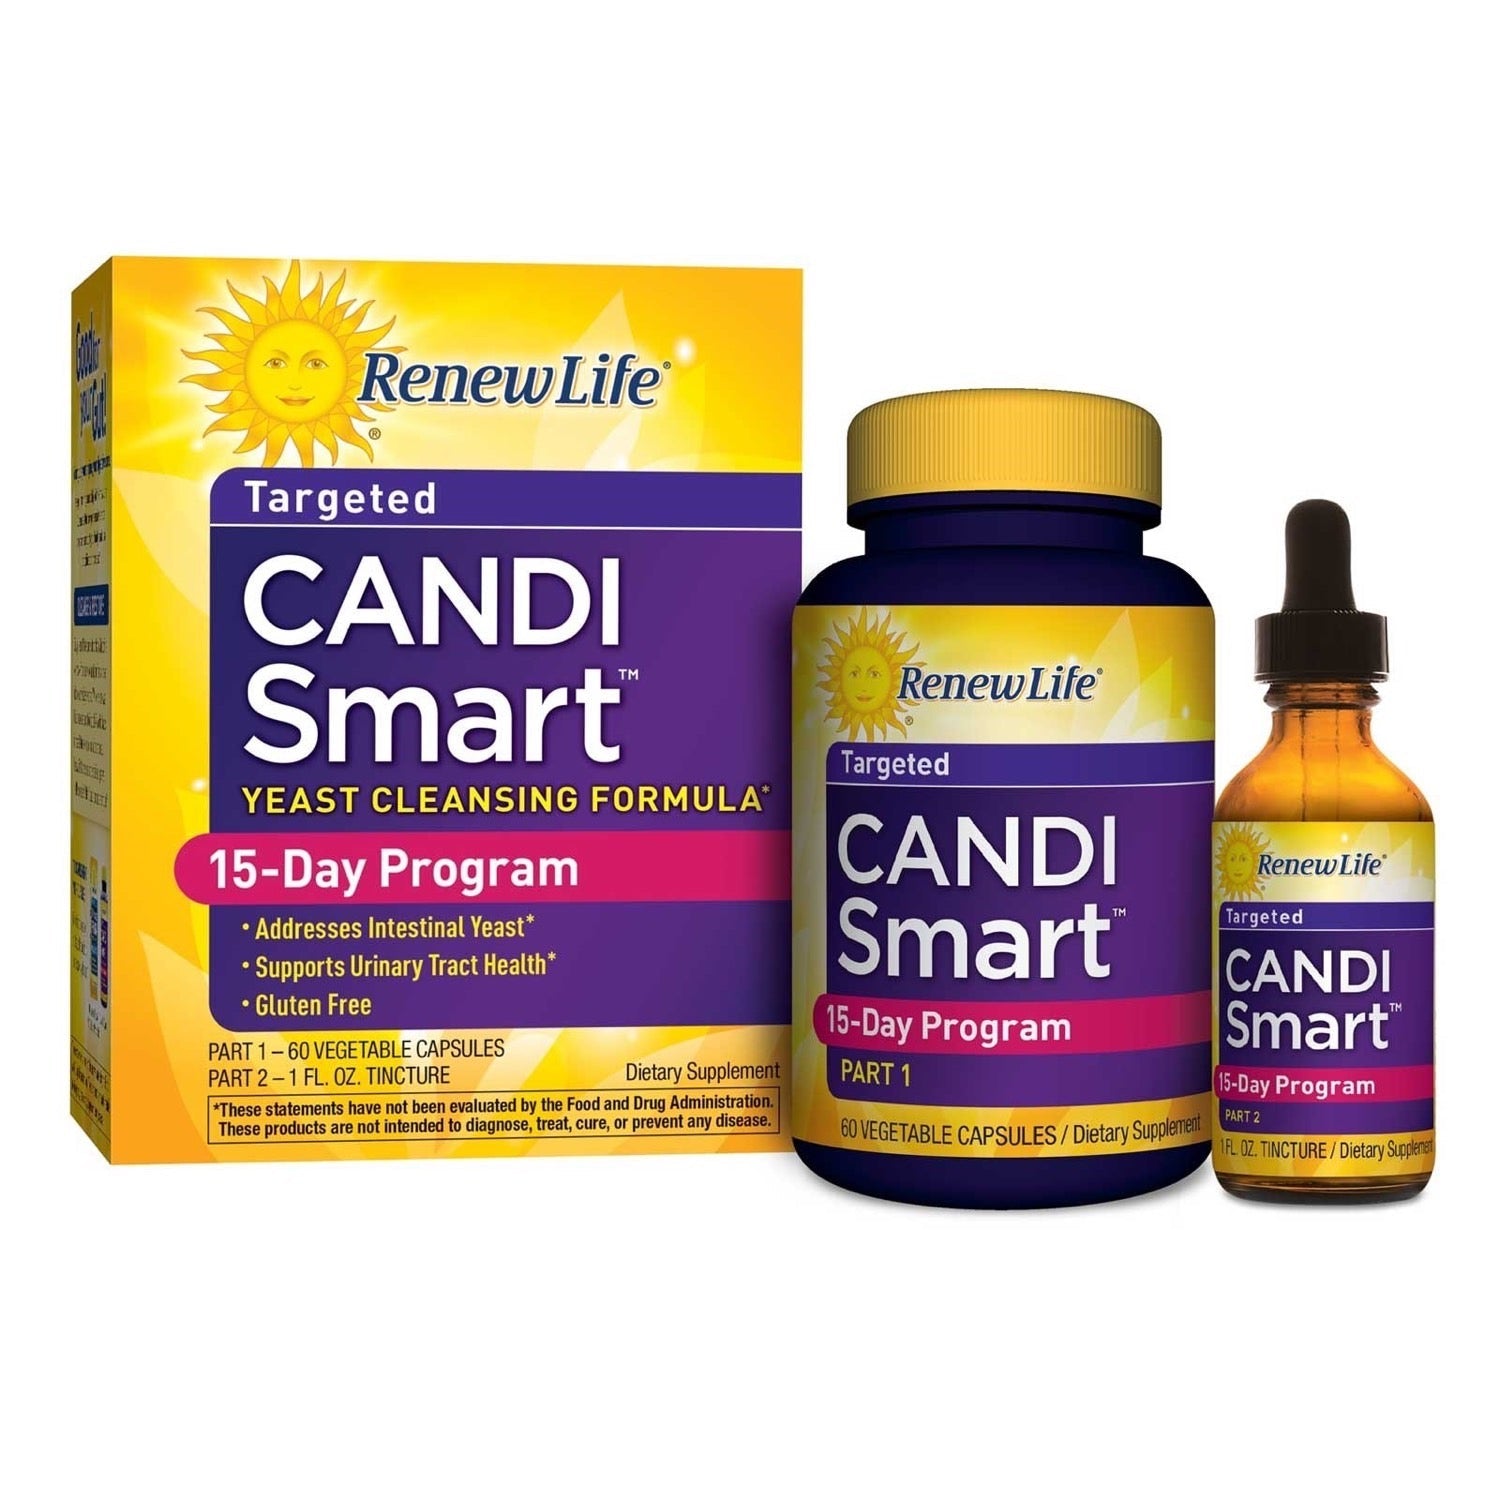 Renew Life Re Adult Cleanse - CandiSmart - 15-Day Yeast Cleansing Program - 2-Part Kit - Gluten & Dairy Free - 60 Vegetarian Capsules + 1 Fl. Oz. Tincture